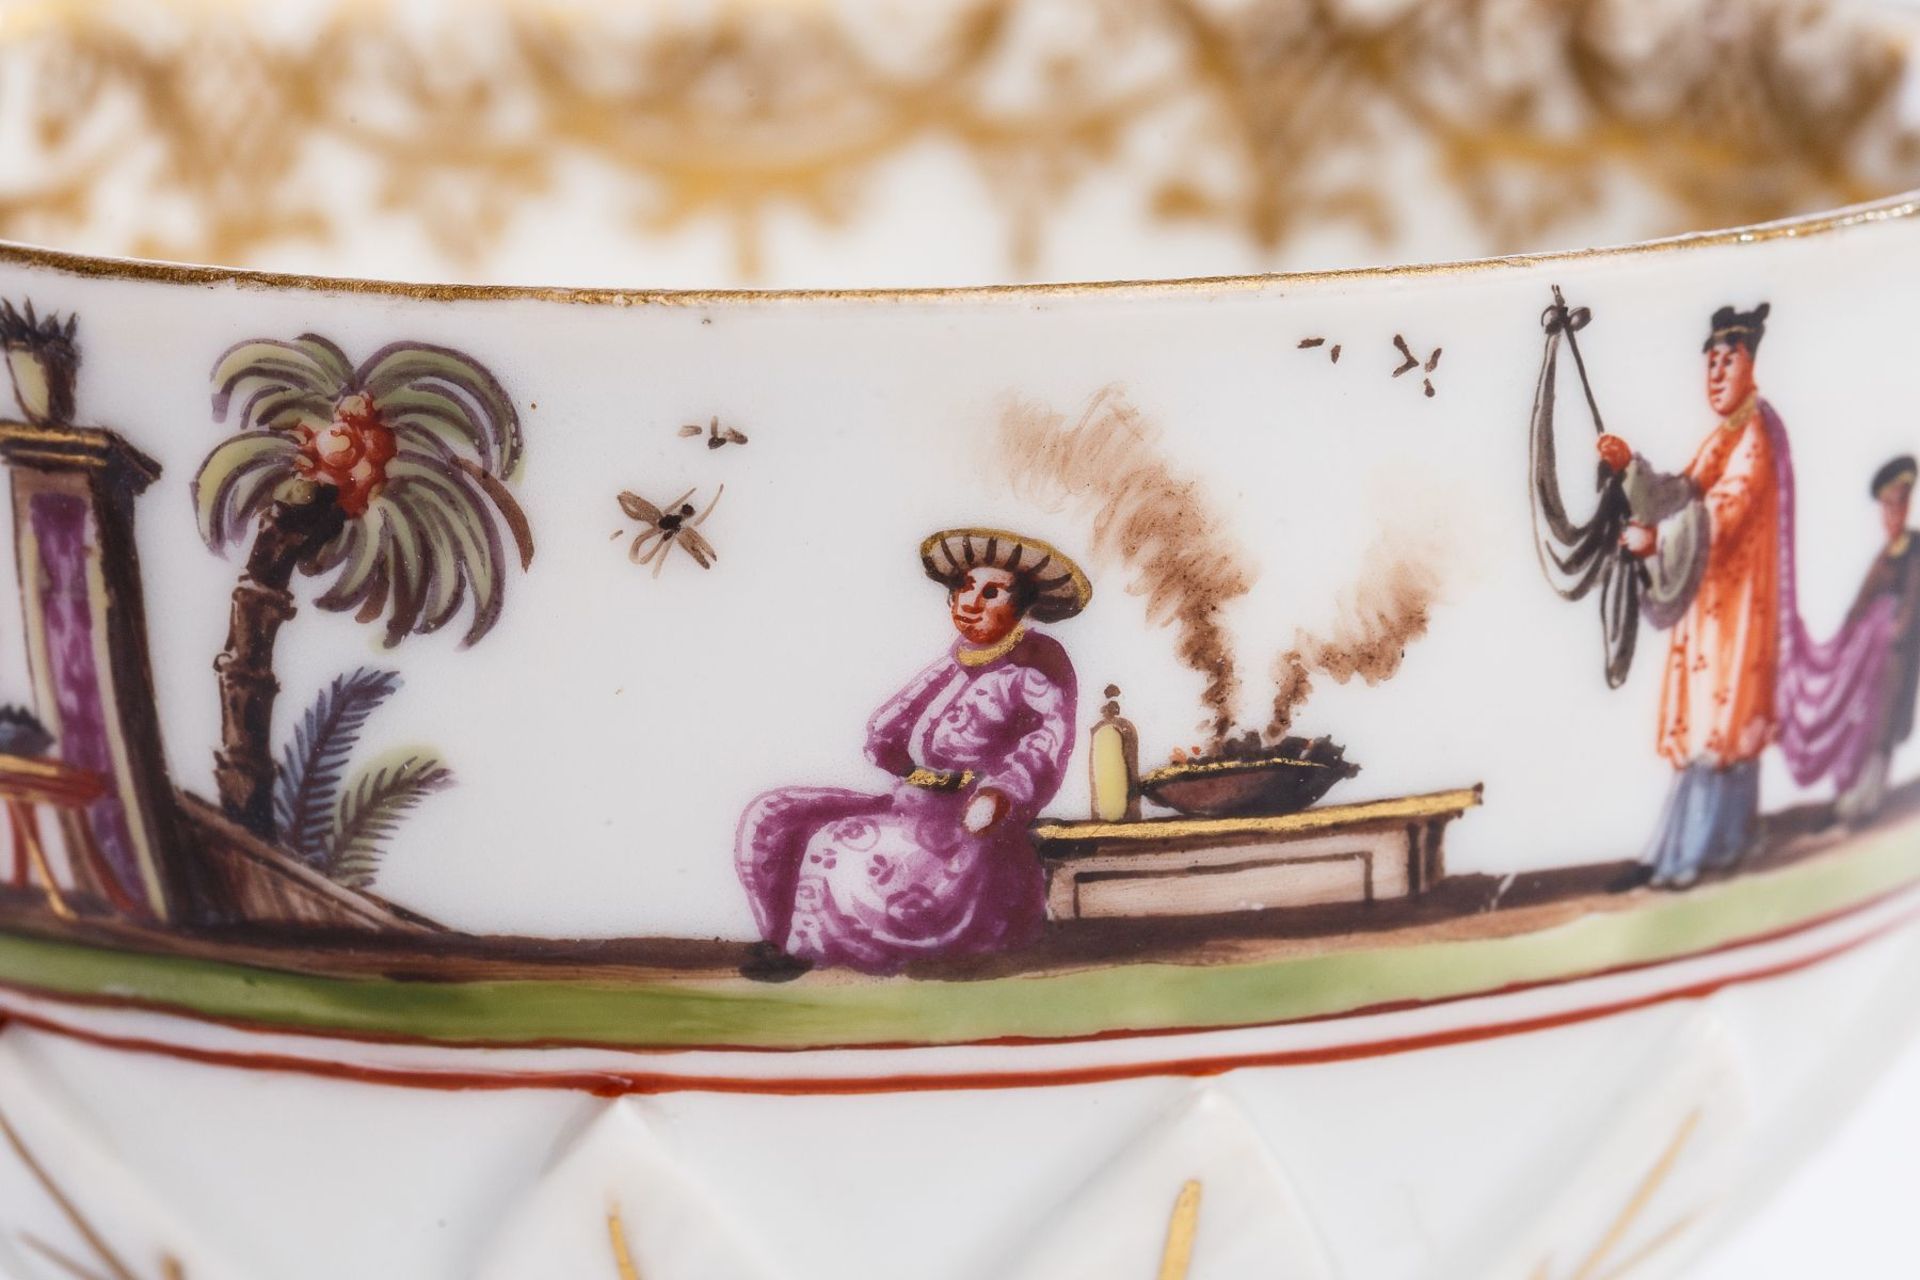 Bowl without Saucer, Meissen 1739 - Image 3 of 4